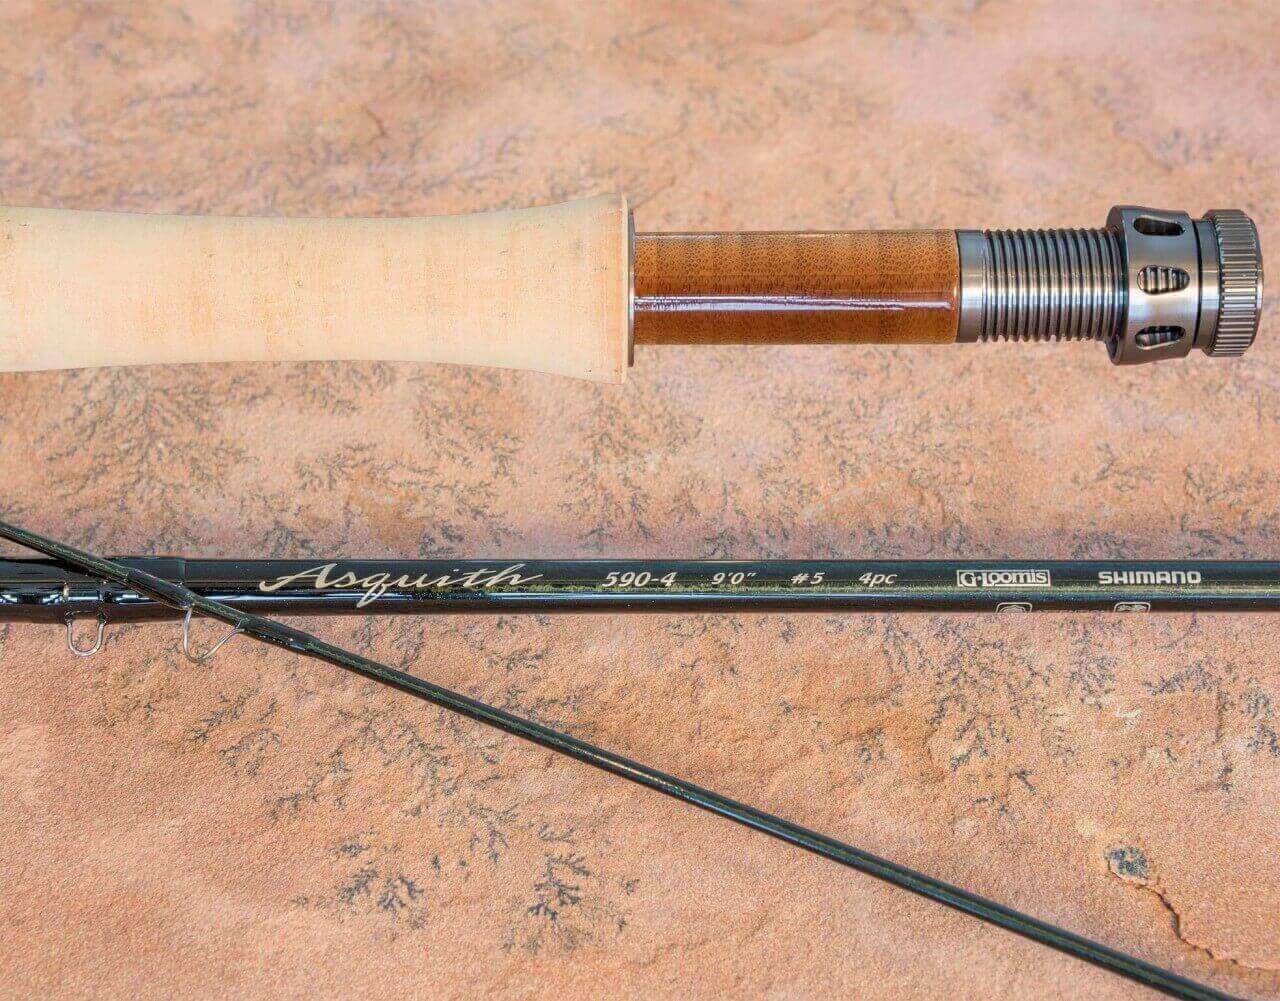 G.Loomis Asquith Fly Rods - the new standard for casting performance